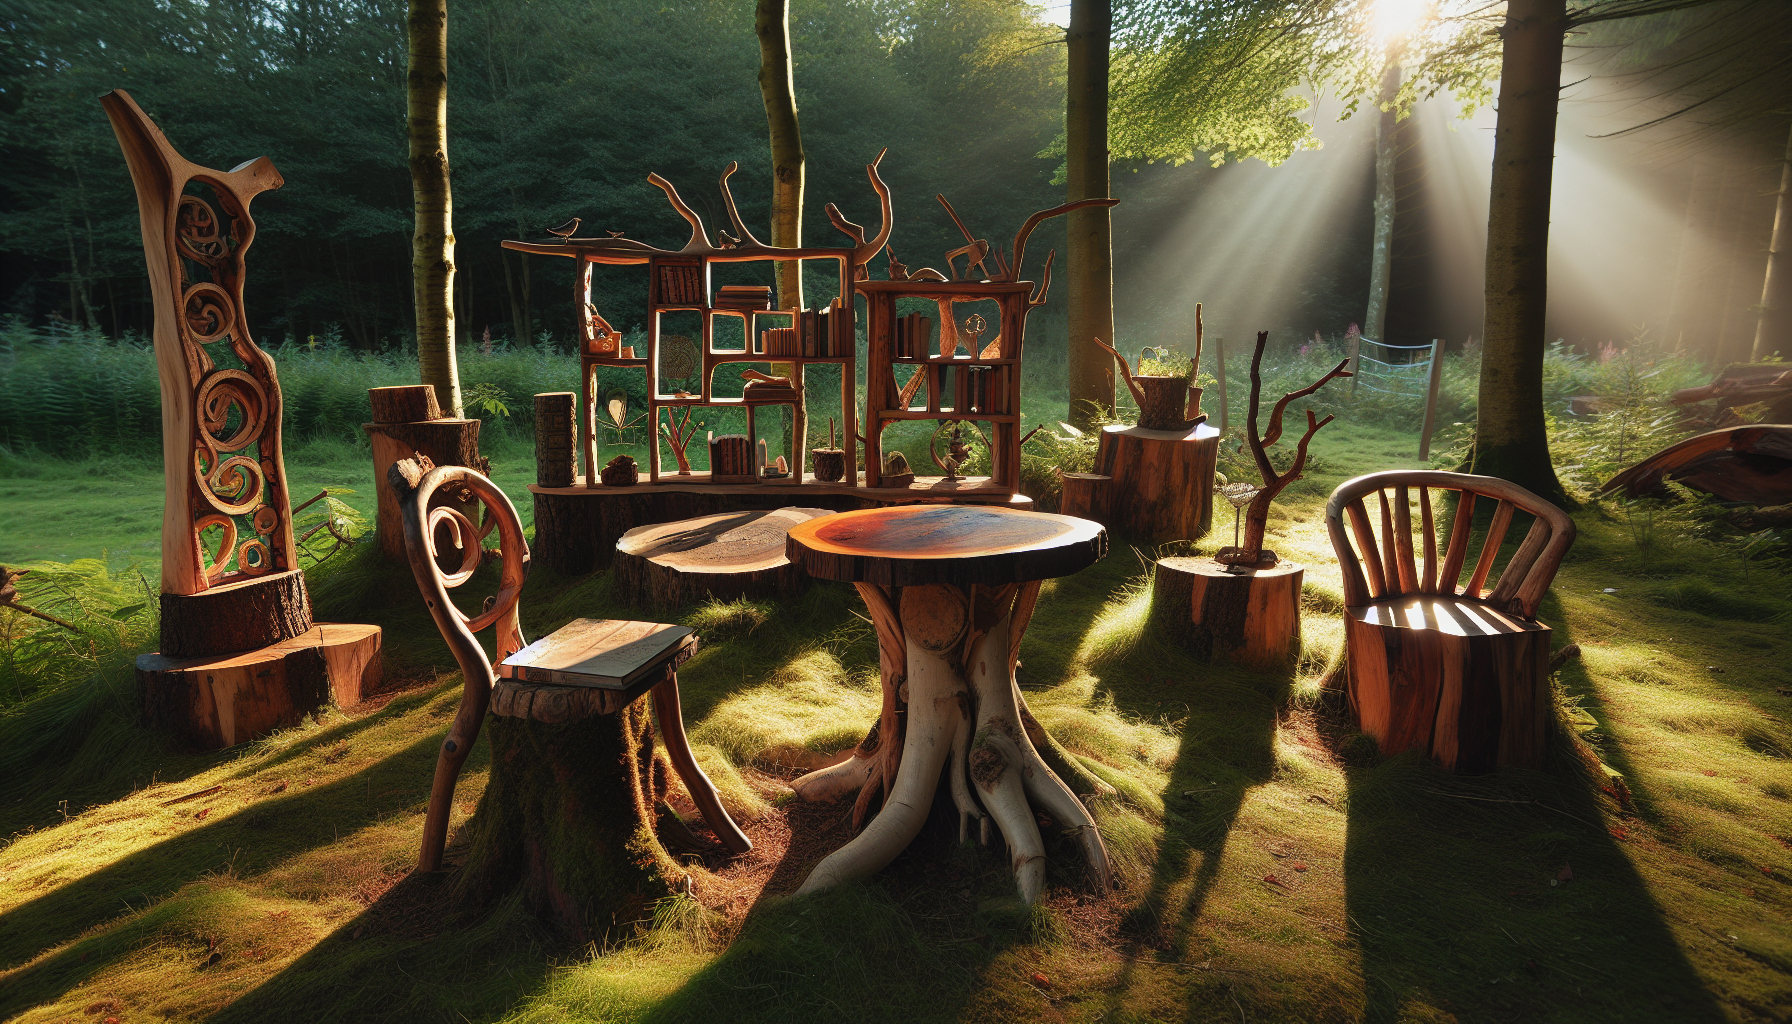 Crafting furniture from tree limbs and stumps